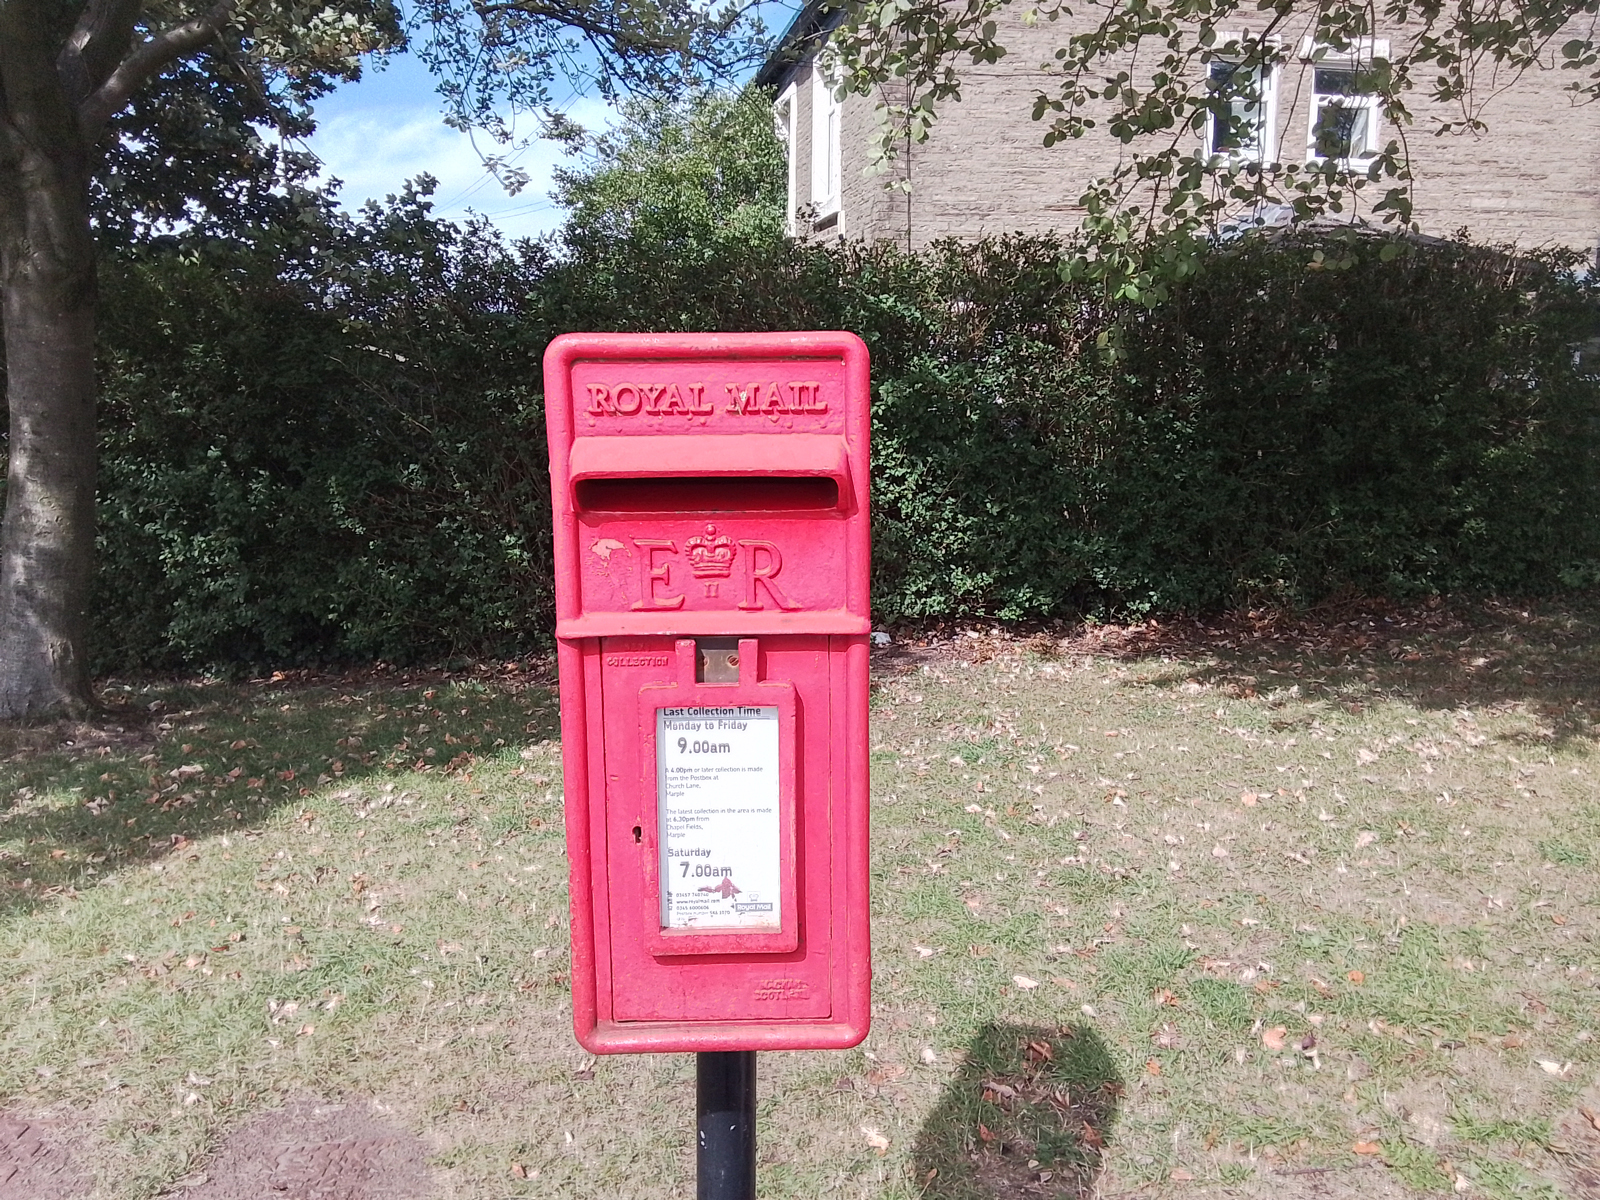 Nokia T10 camera sample showing a postbox in daylight